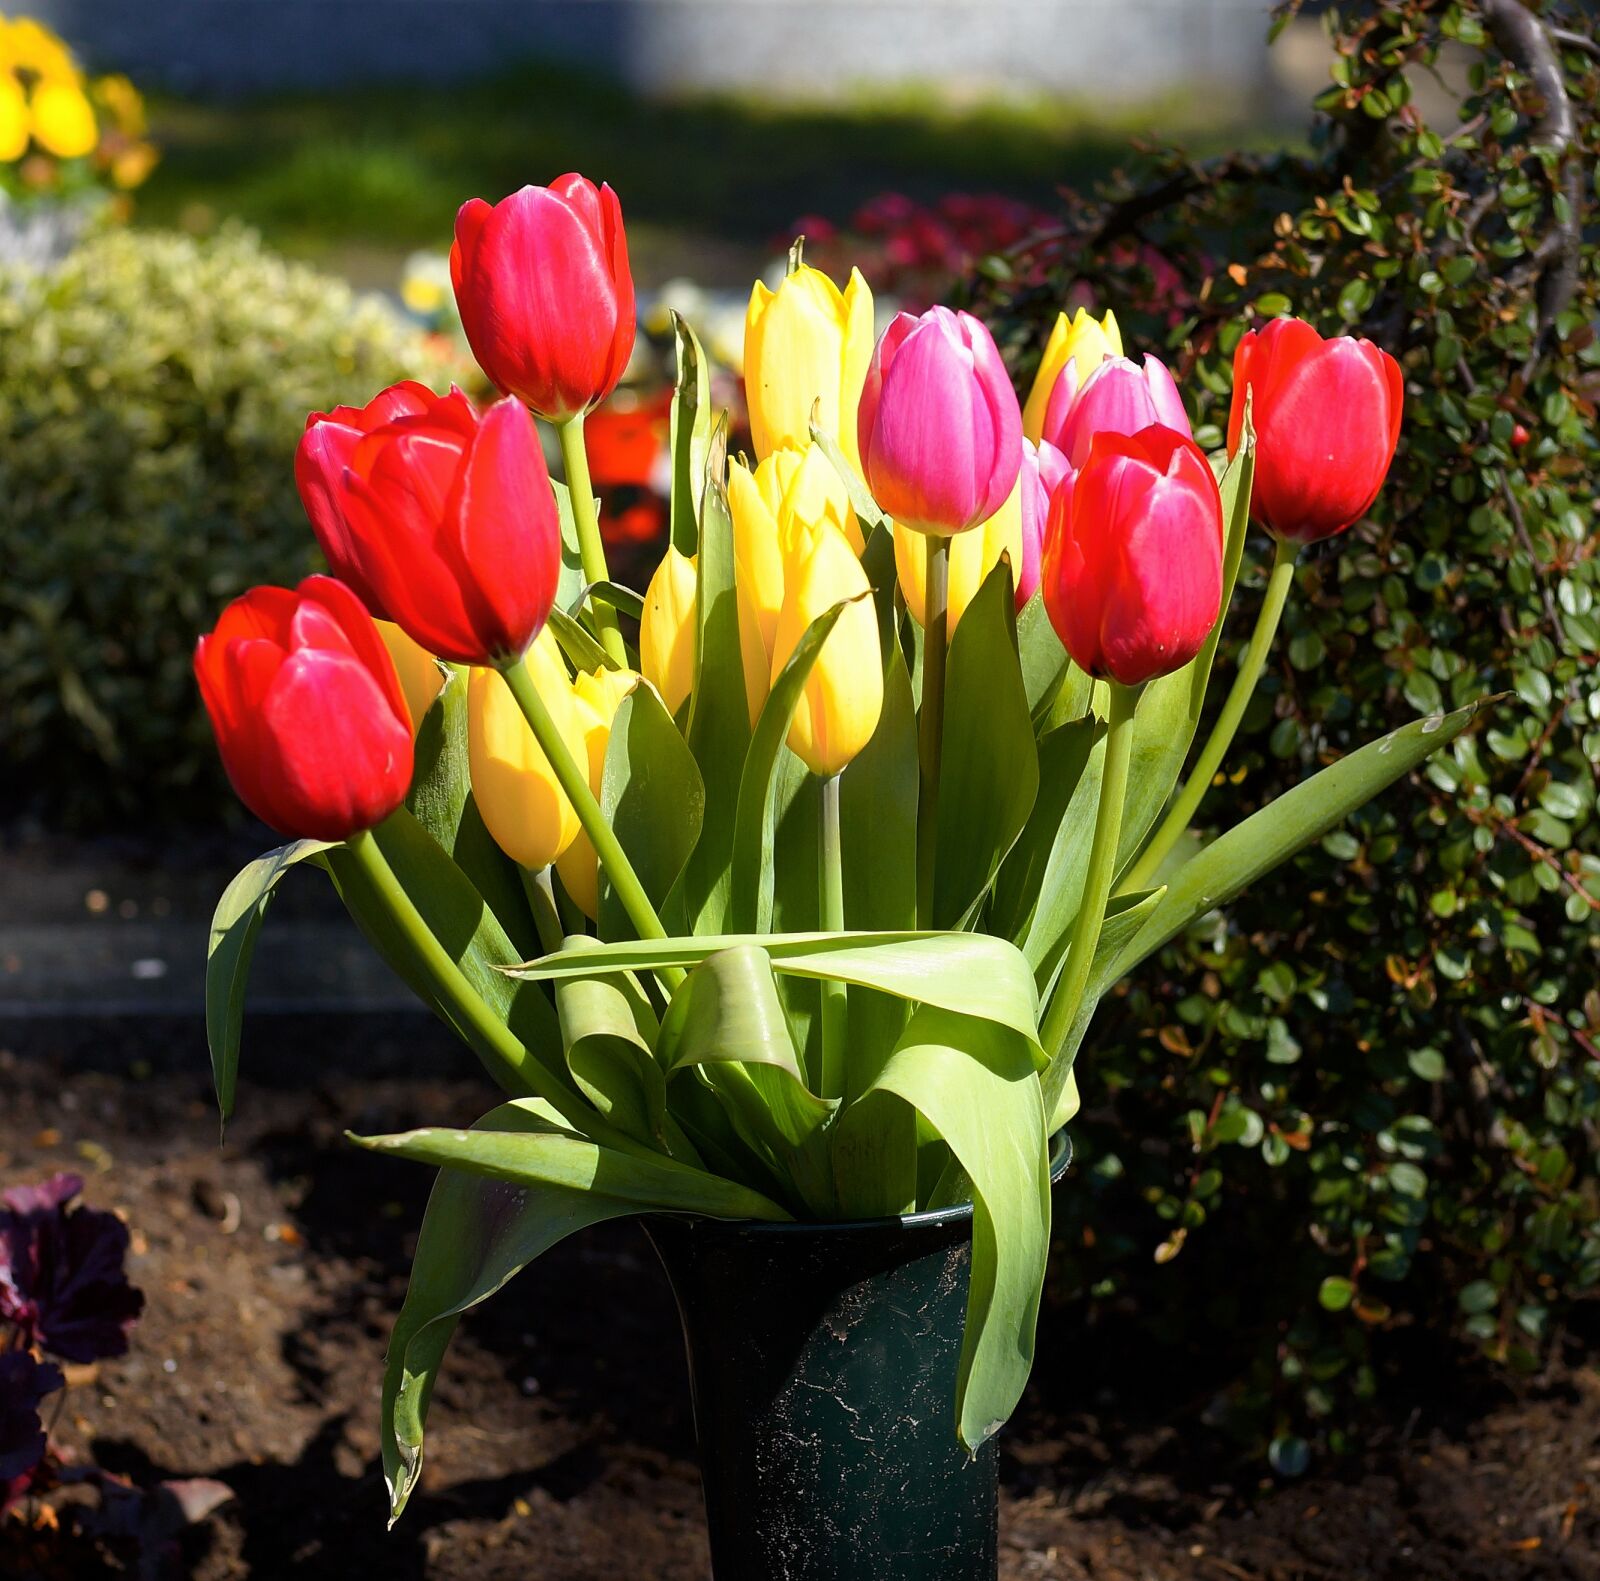 Sony a99 II sample photo. Tulips, colorful, flowers photography